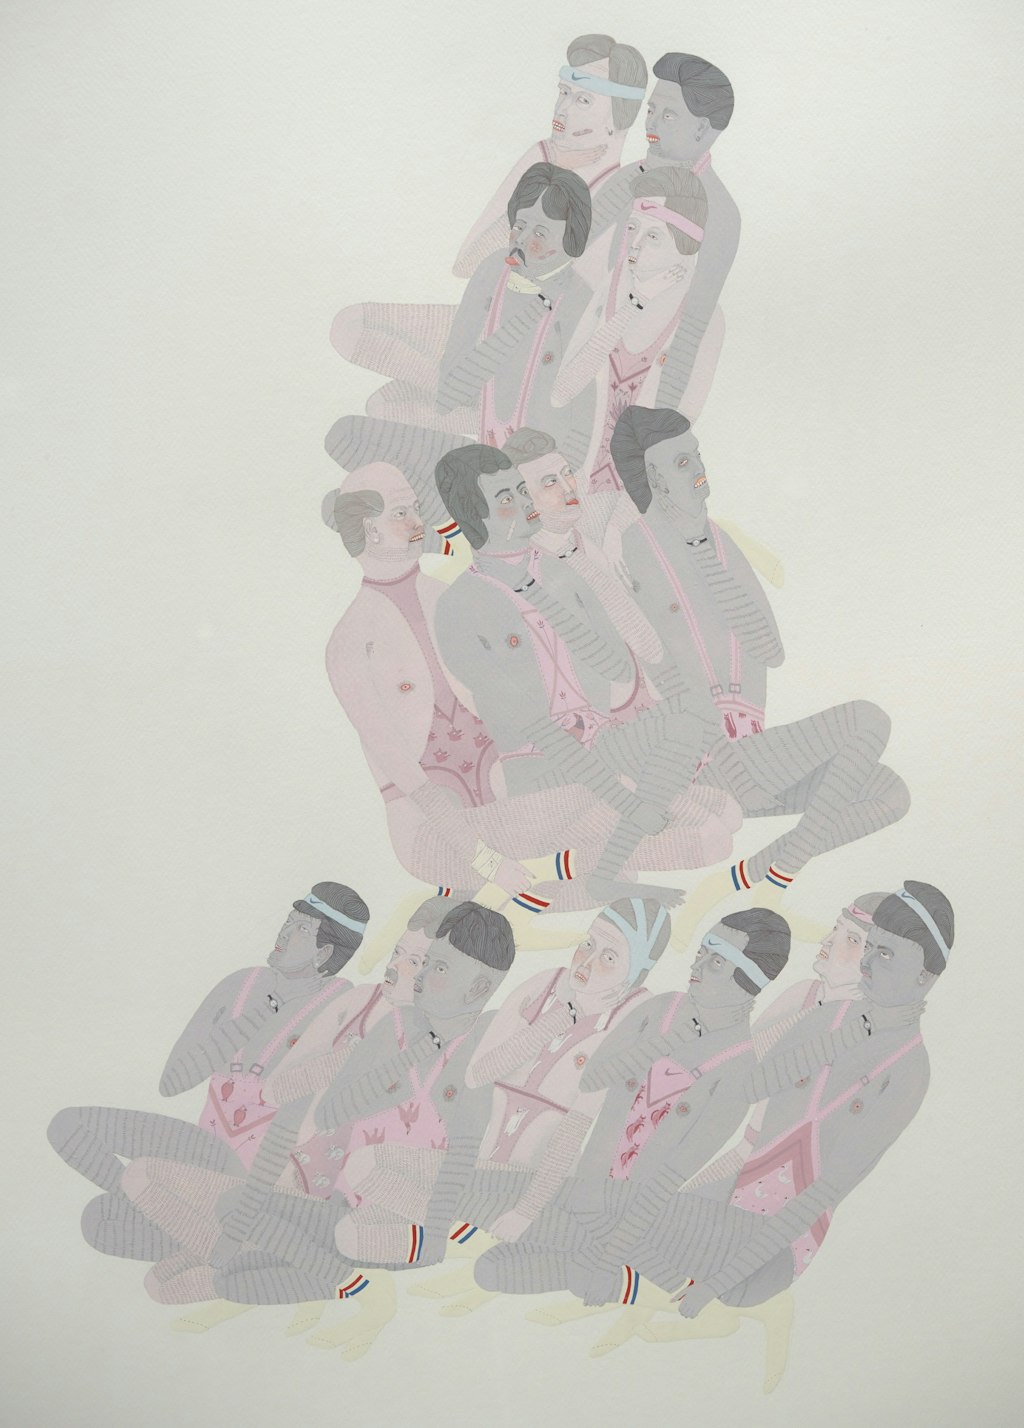 A watercolour showing 15 male figures, sitting cross-legged, assembled in a three-tiered pyramid shape. They are wearing brief wrestling costumes and socks with two horizontal bands. Several have headbands. Their skin tones are either pale pink or pinkish grey.